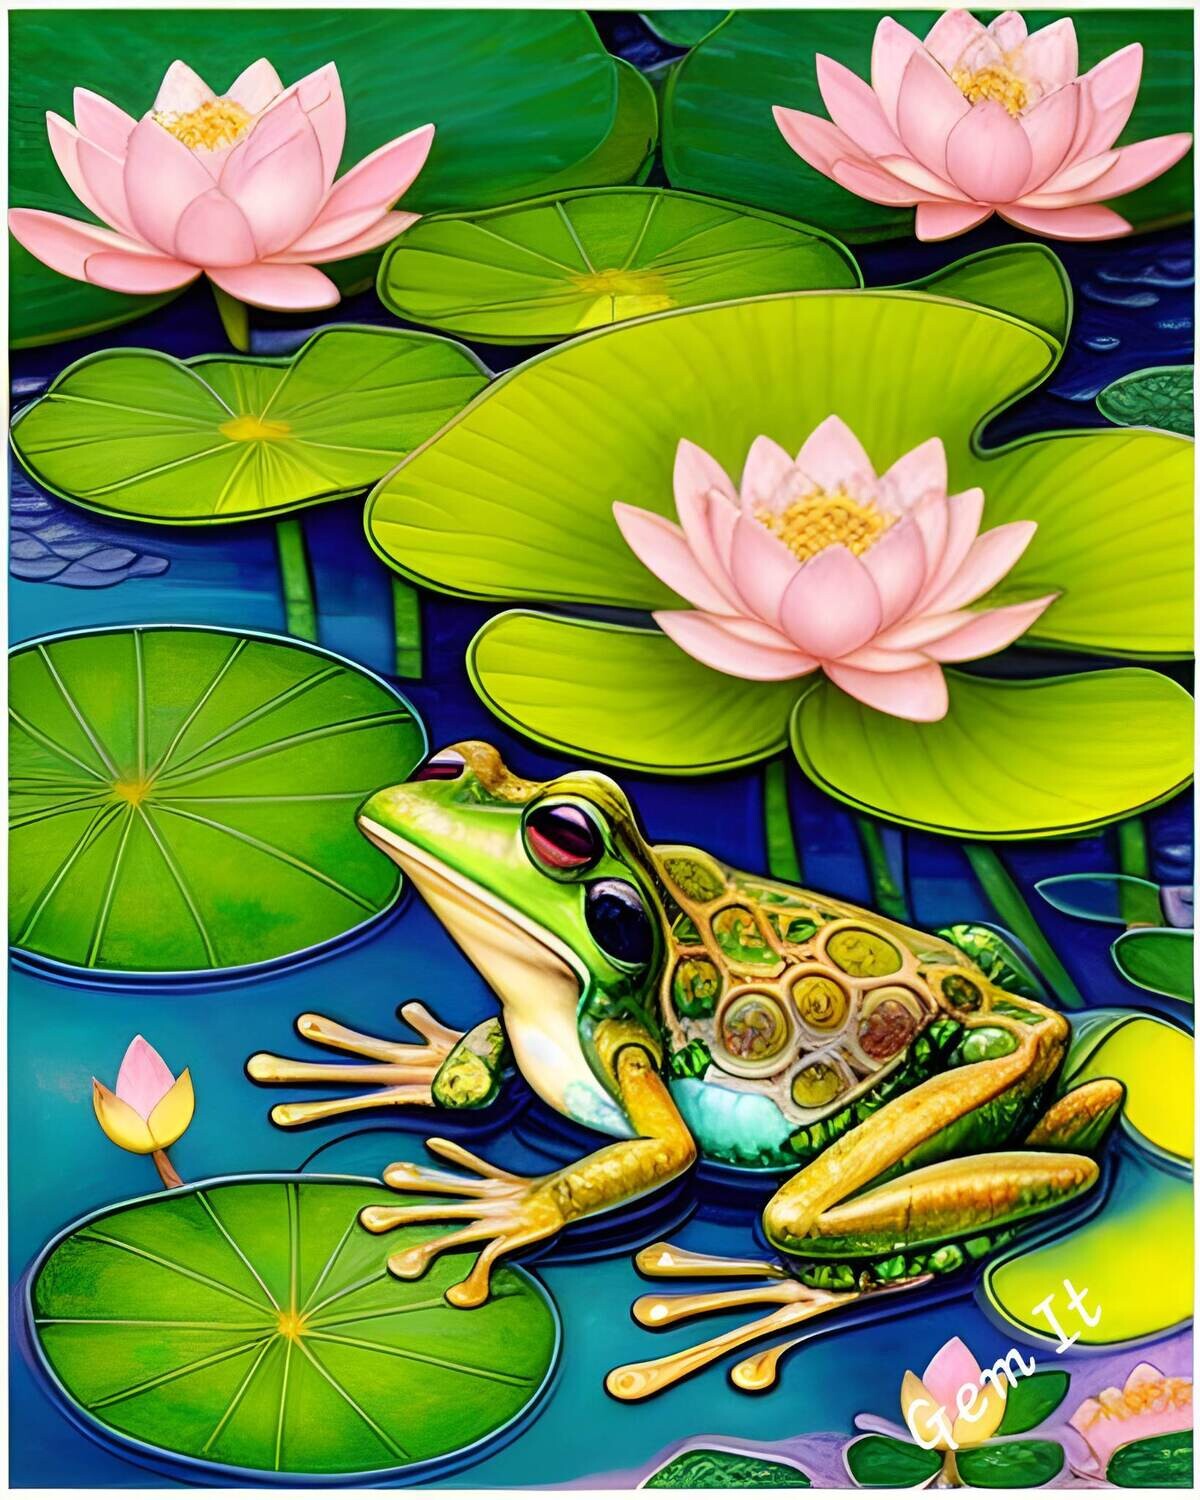 Frog in a pond 130 - Specially ordered for you. Delivery is approximately 4 - 6 weeks.